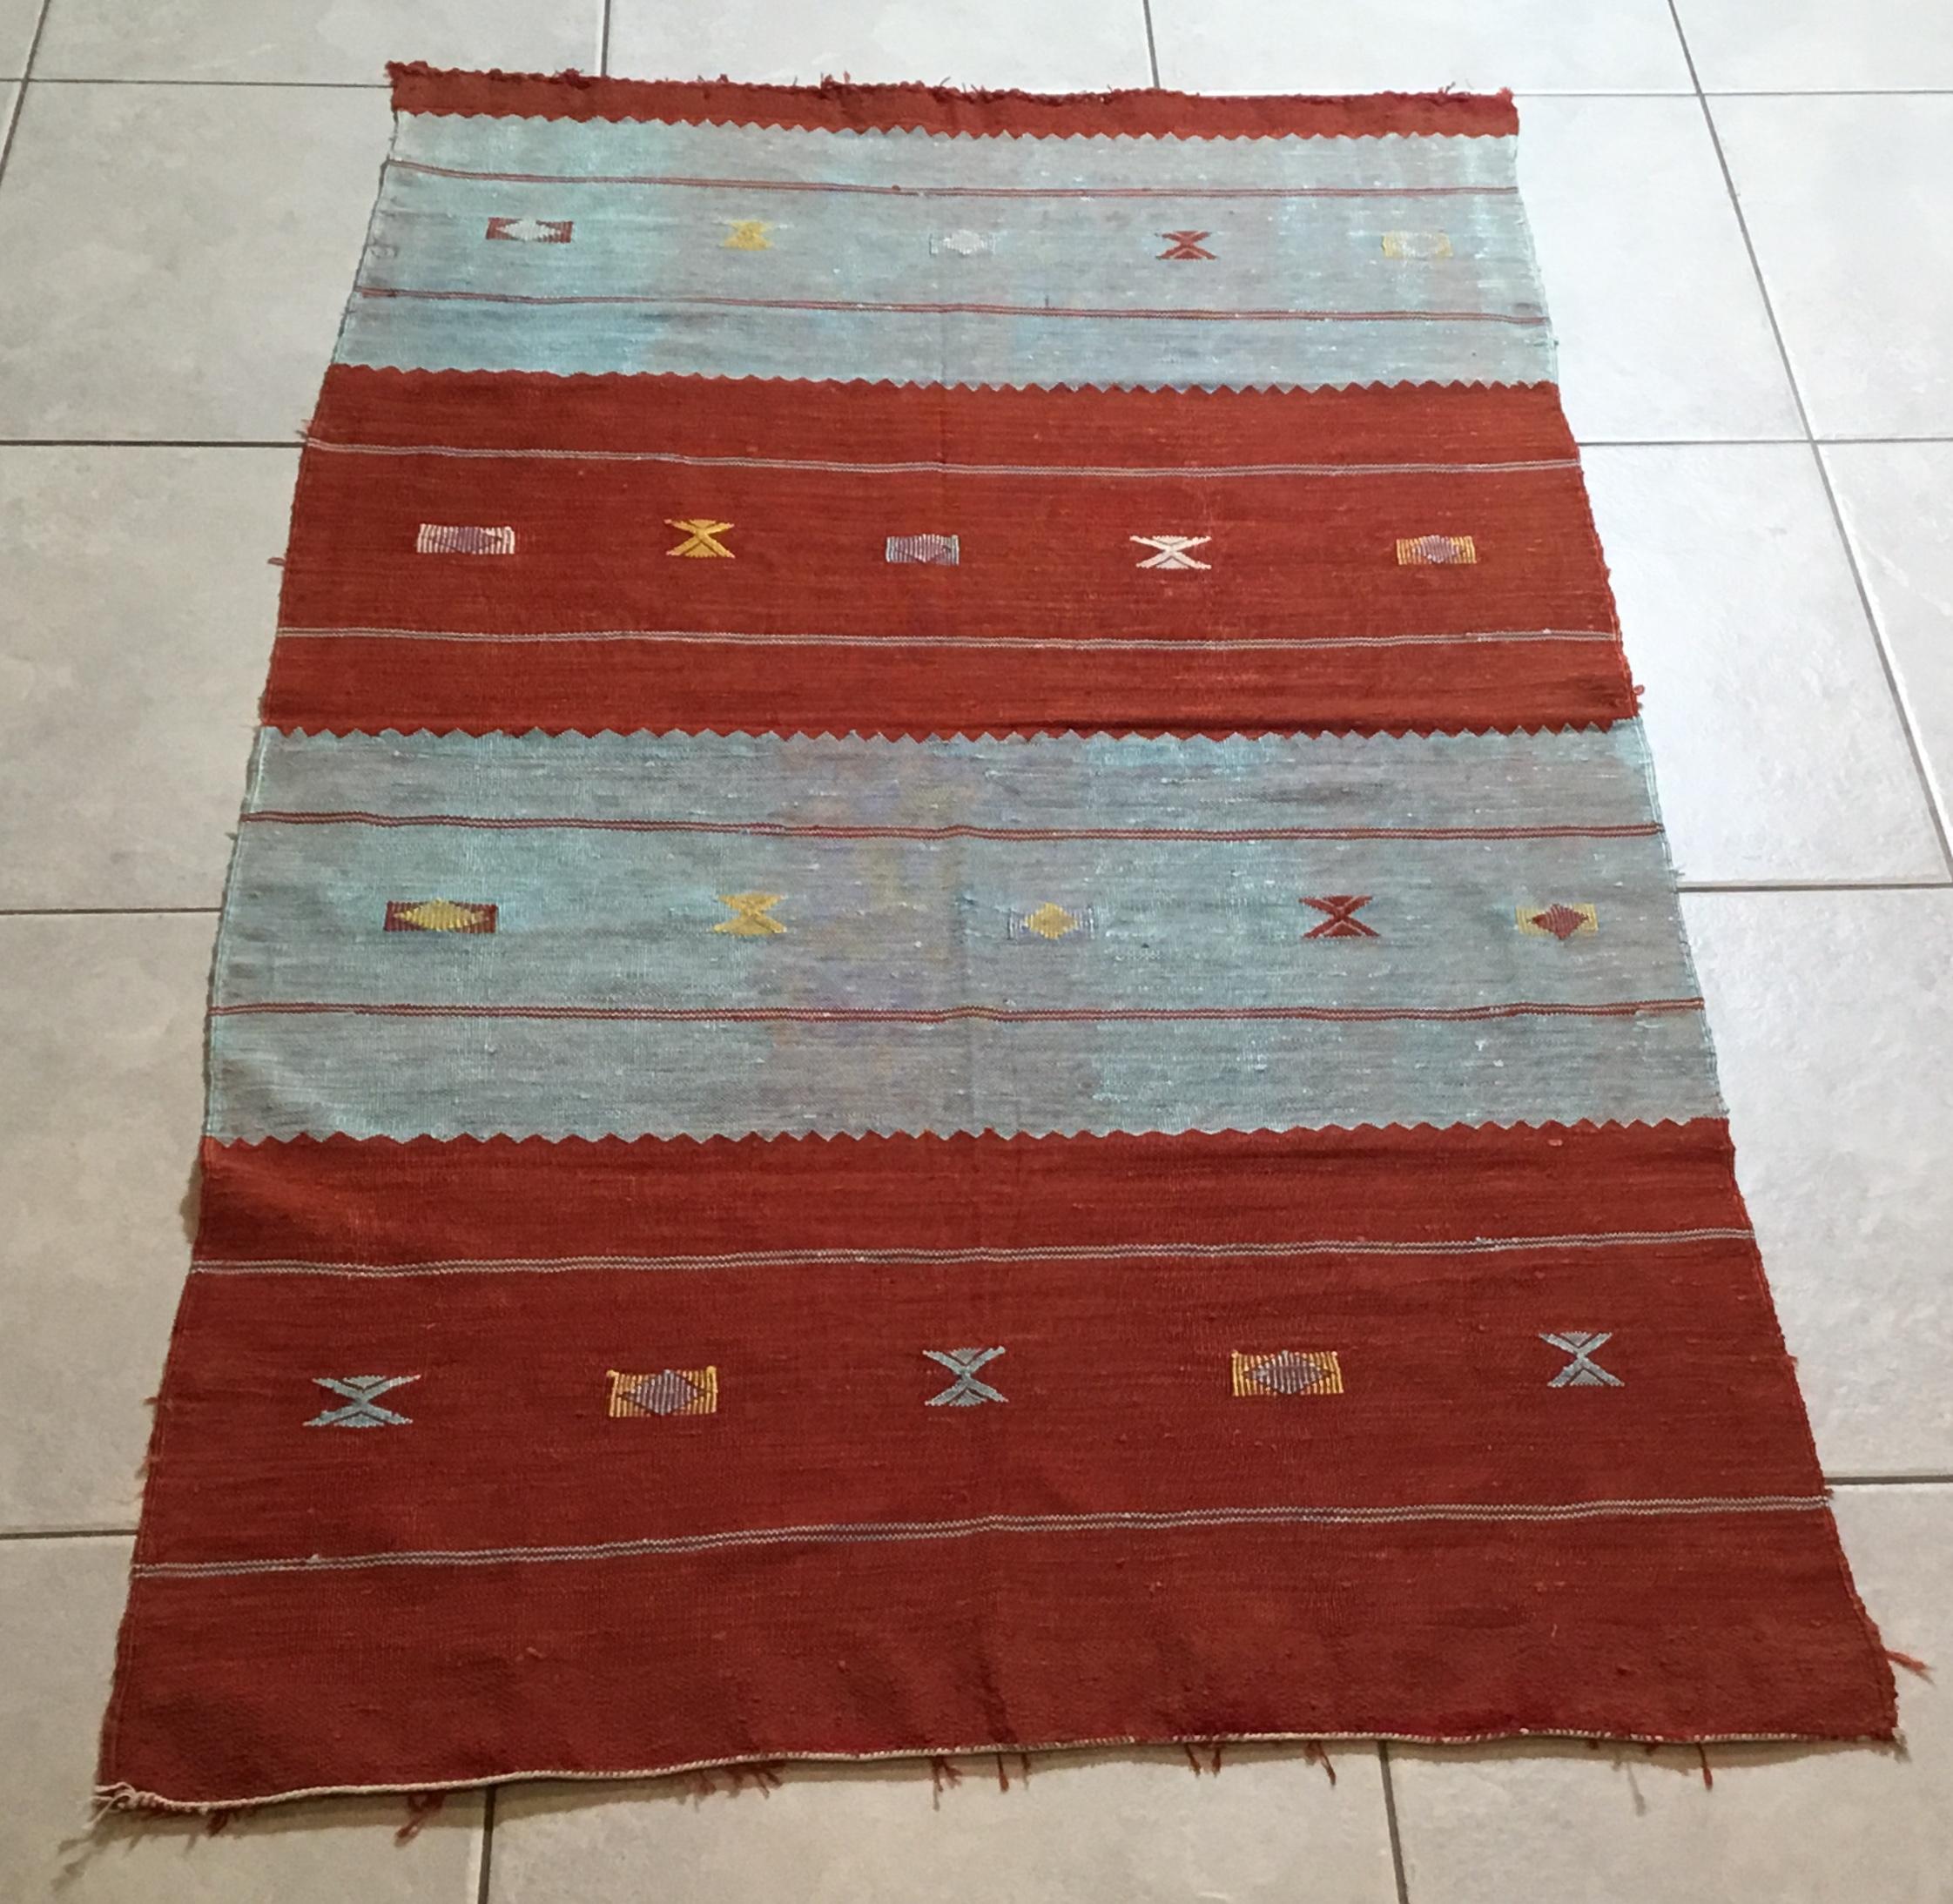 Beautiful decorative handwoven rug with soft multicolor geometric motifs on a red-turquoise color background. nicely feel to touch .
Could be used as a wall hanging tapestry.